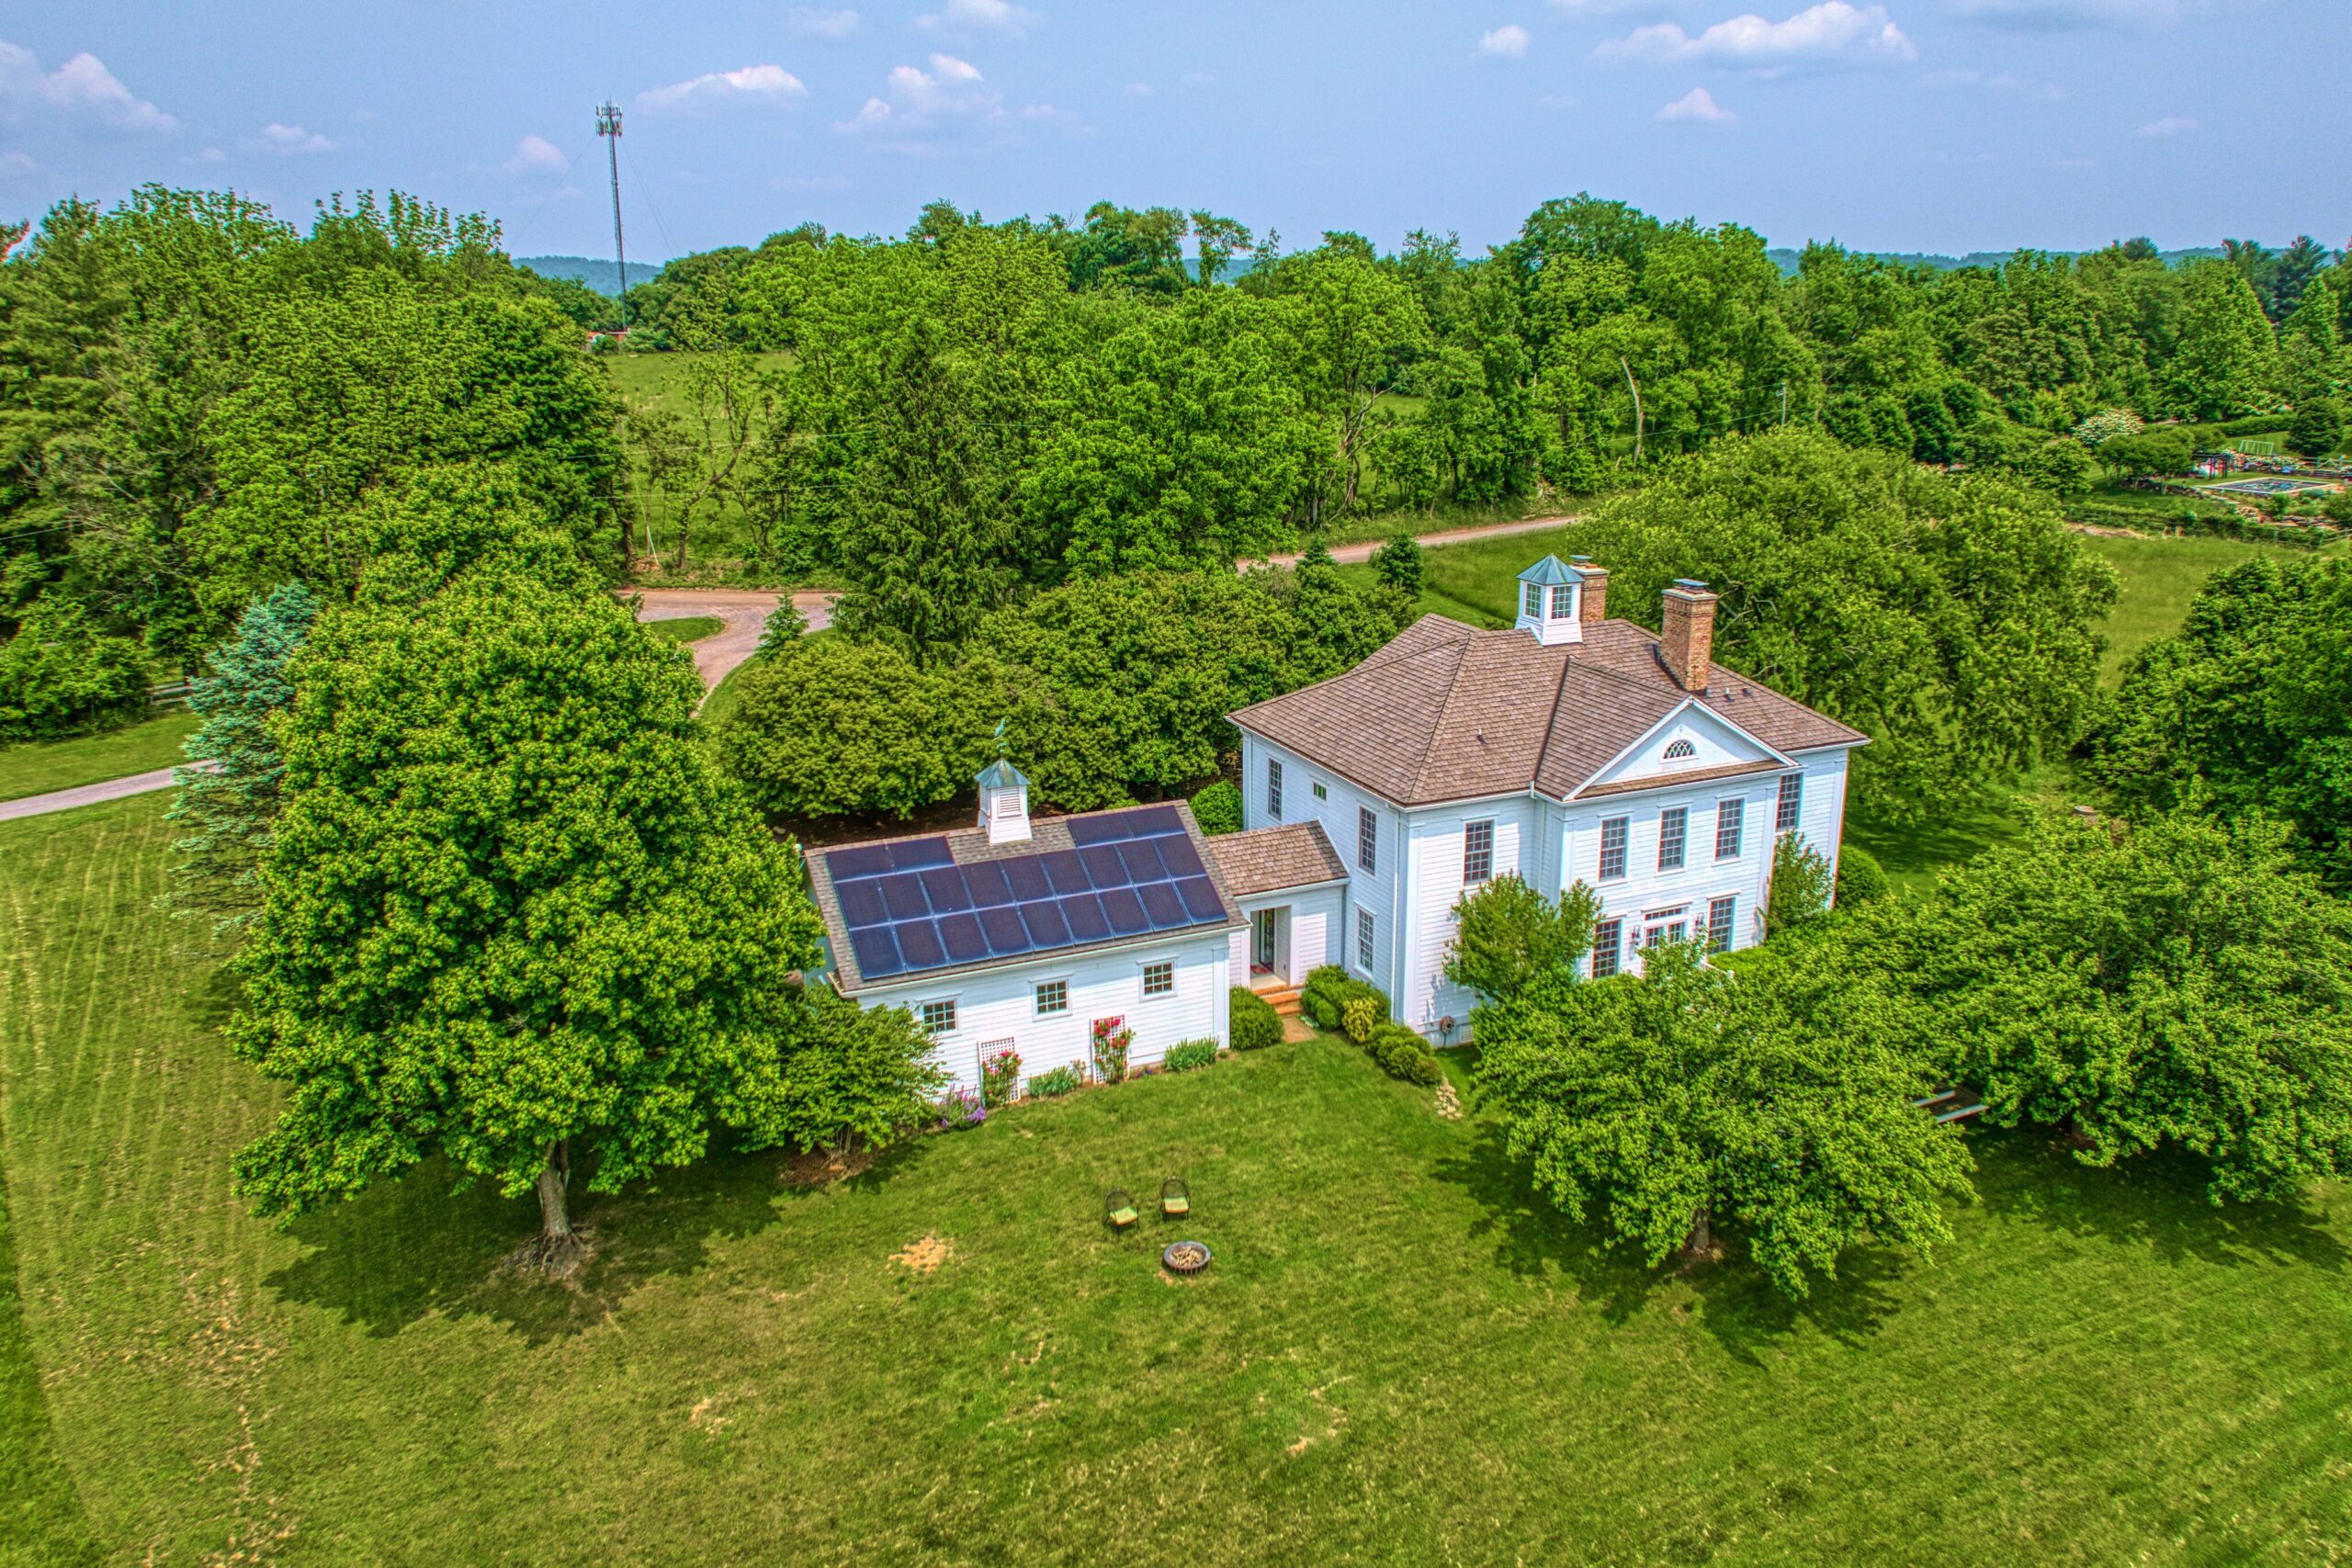 Professional drone aerial photo of 15203 Clover Hill Road - showing the rear of the white home surrounded by trees and 3-bay garage visible with solar panels